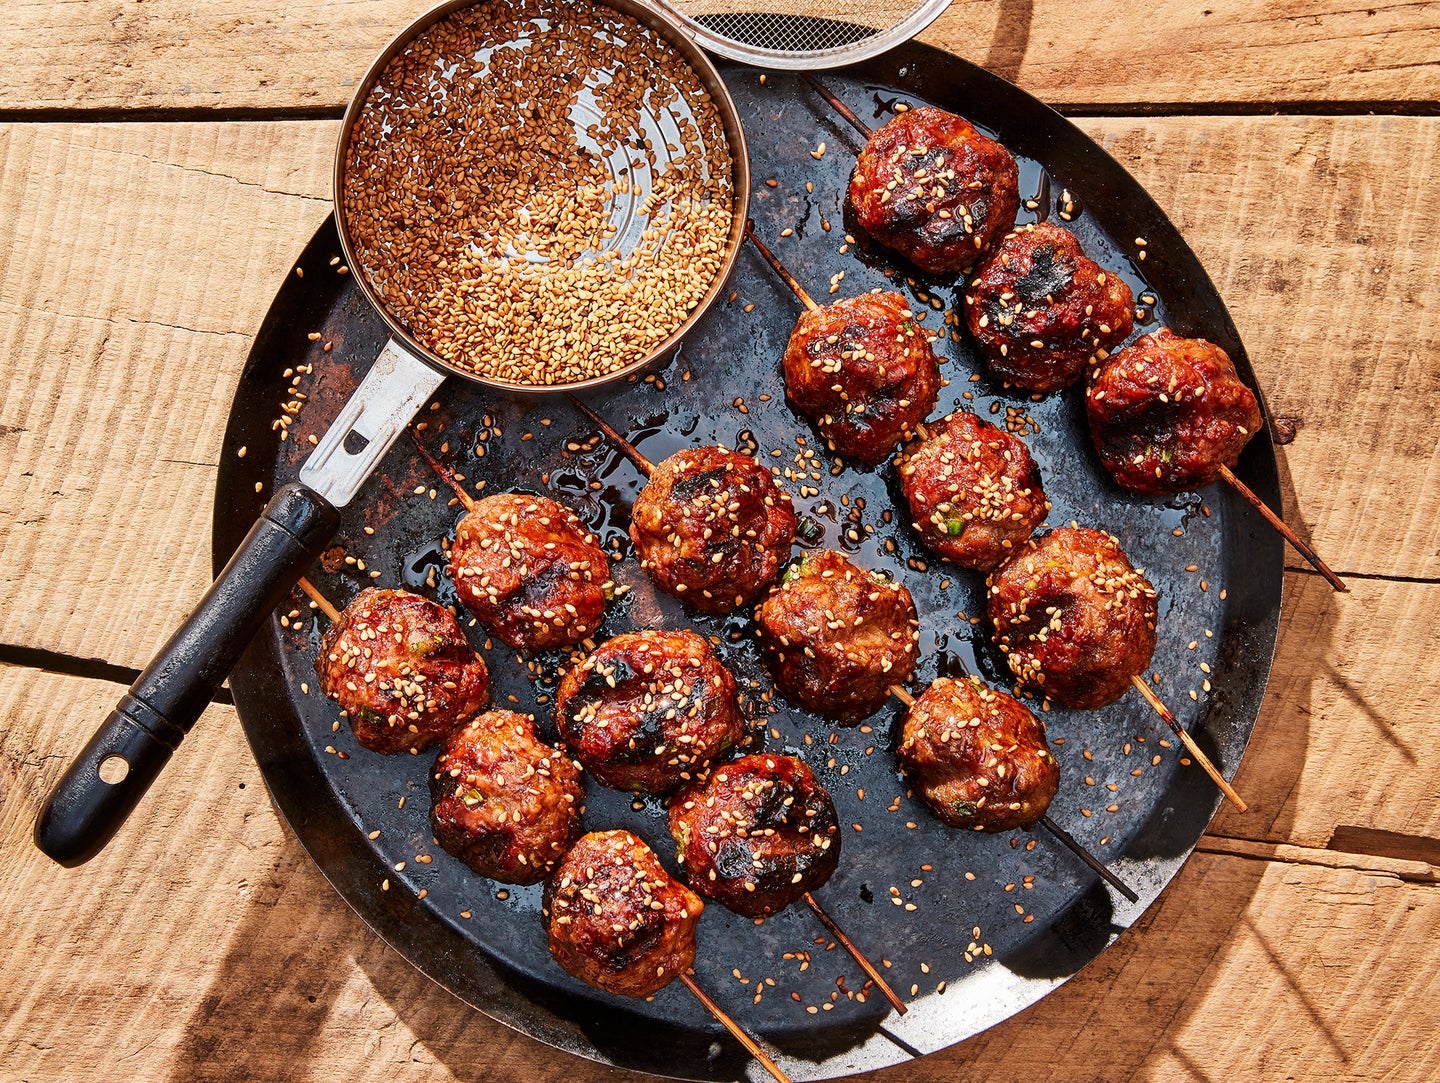 Grilled tsukune makes for a great appetizer for backyard cookouts in the summer.